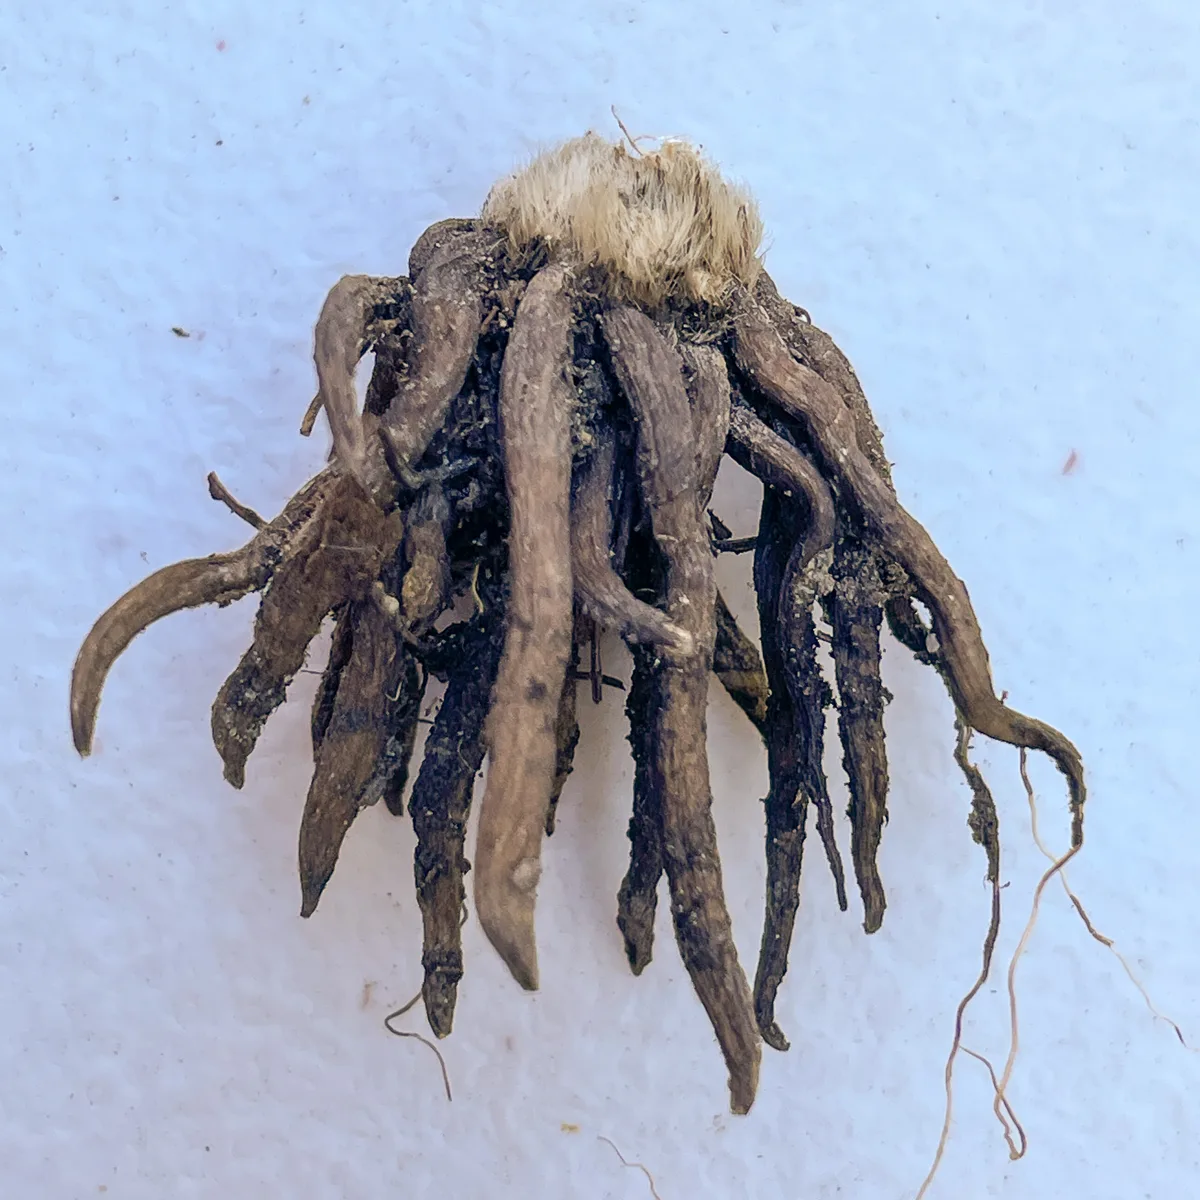 dried ranunculus corm after cleaning